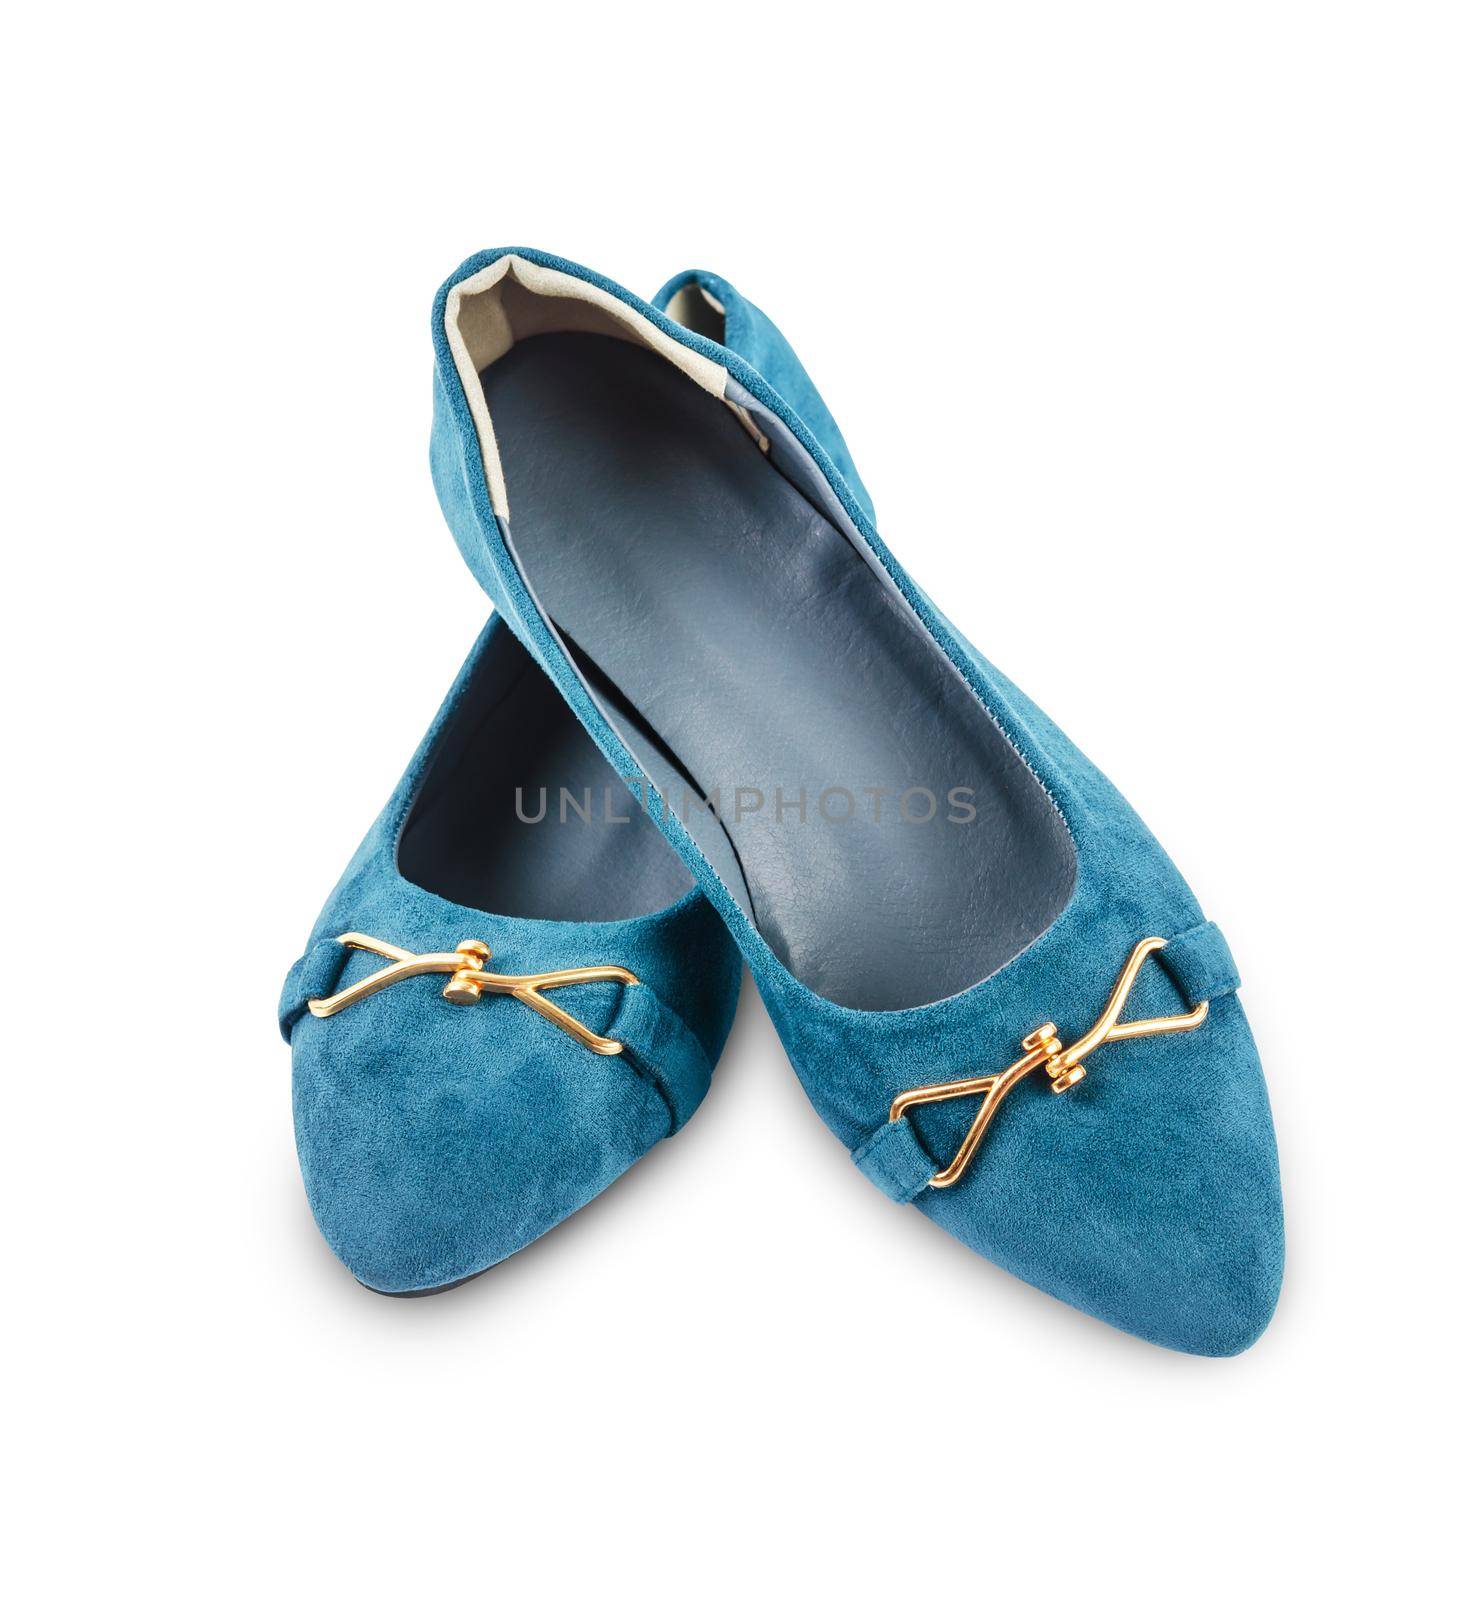 The Low-heeled shoes dark blue color fabric skin for women isolated on white background, Saved clipping path.